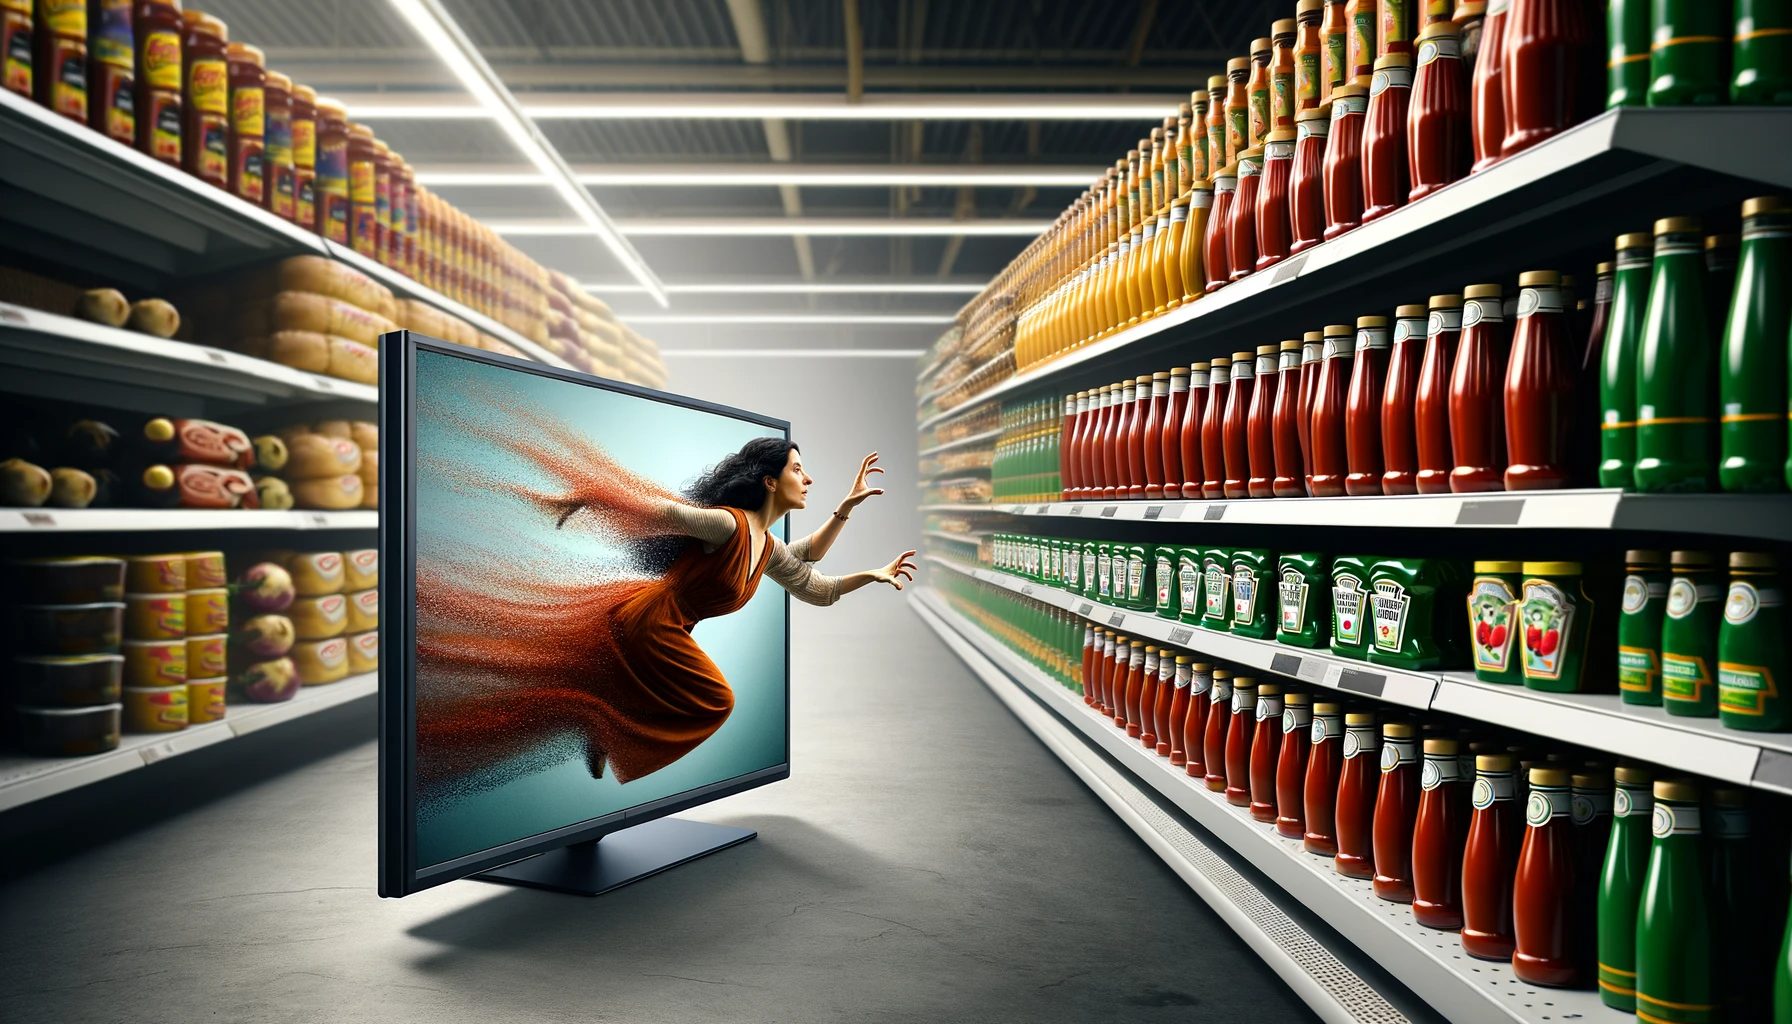 Retail Analytics - A woman in an orange dress reaches out from a large flat-screen television, set between supermarket shelves, towards a bottle of ketchup, visually symbolizing the use of online data for enhancing the physical retail experience.